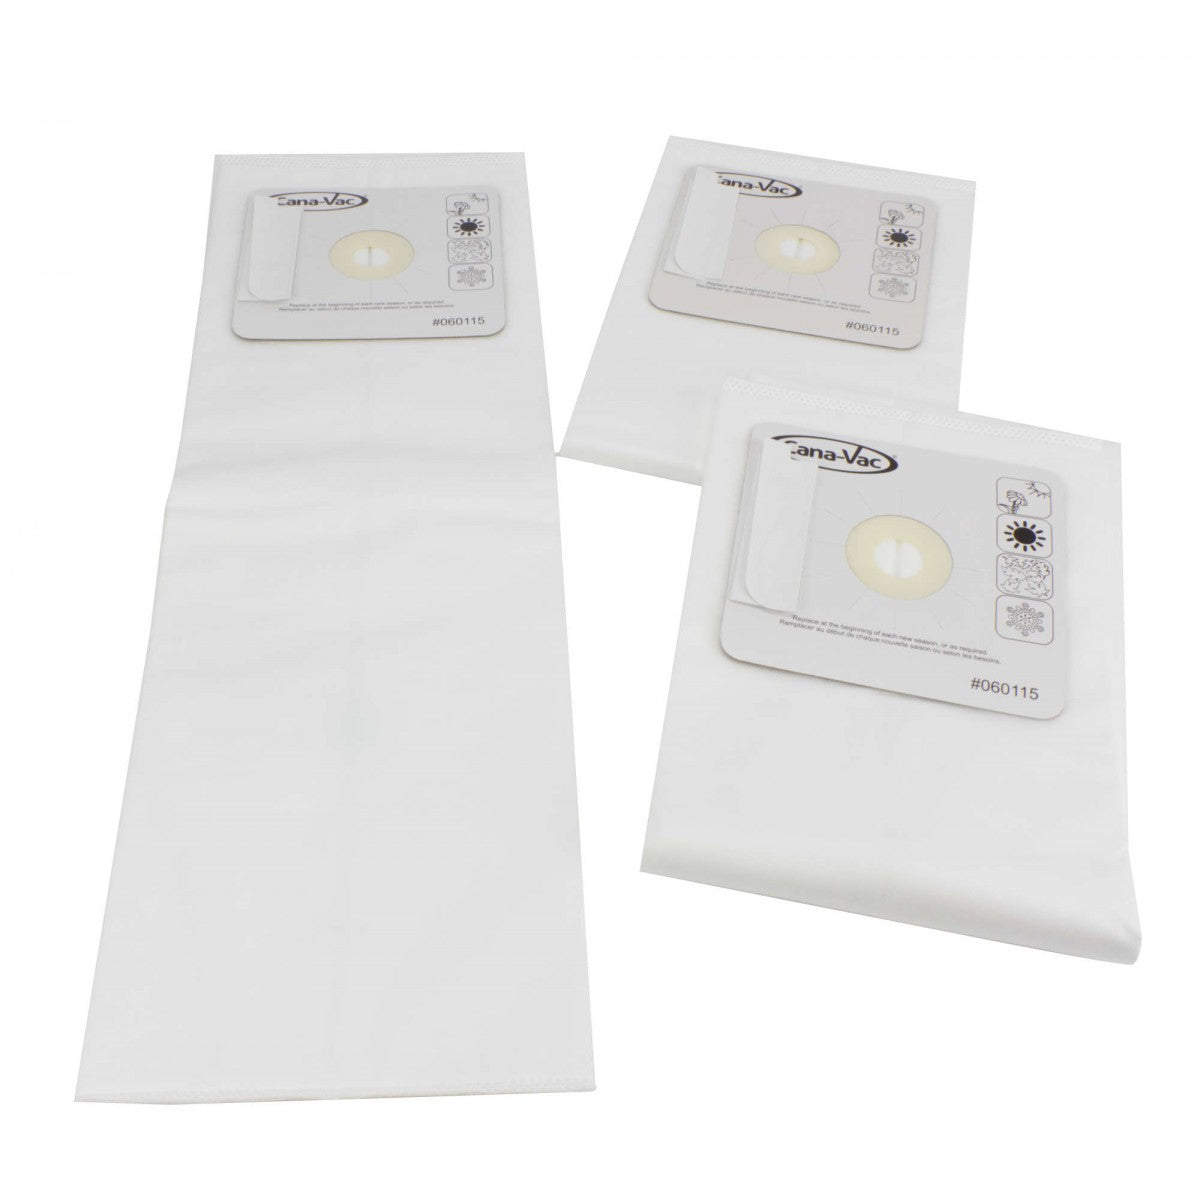 Vacurama Premium Central Vacuum Bags  Replacement for Nuera Filtre 189  Husky Filtre 189 DuoVac Filtre 189 SoluVac Filtre189 SVS And Other CV  Systems 3 Bags  Amazonca Home